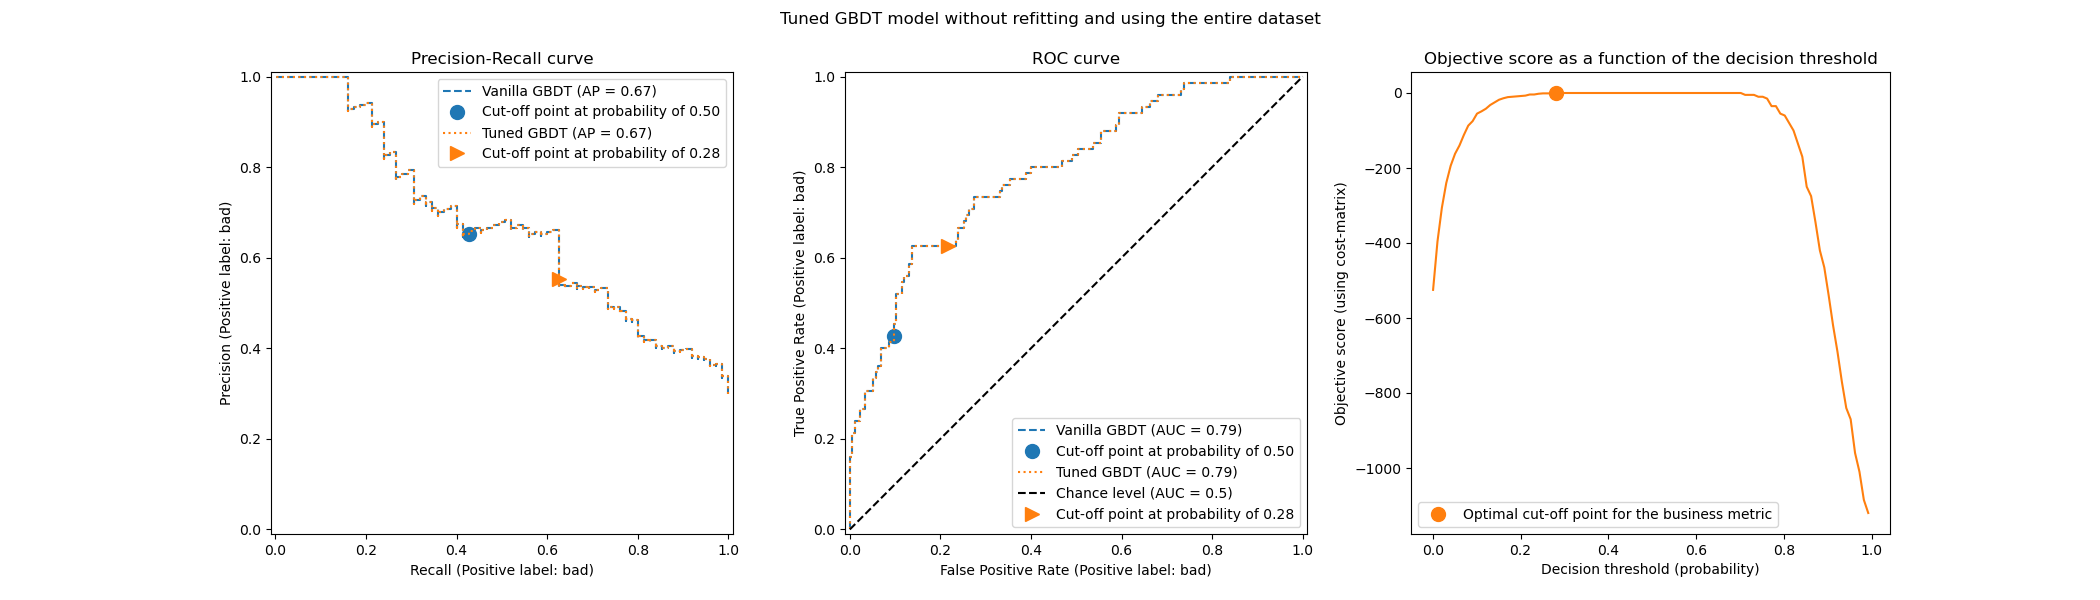 Tuned GBDT model without refitting and using the entire dataset, Precision-Recall curve, ROC curve, Objective score as a function of the decision threshold